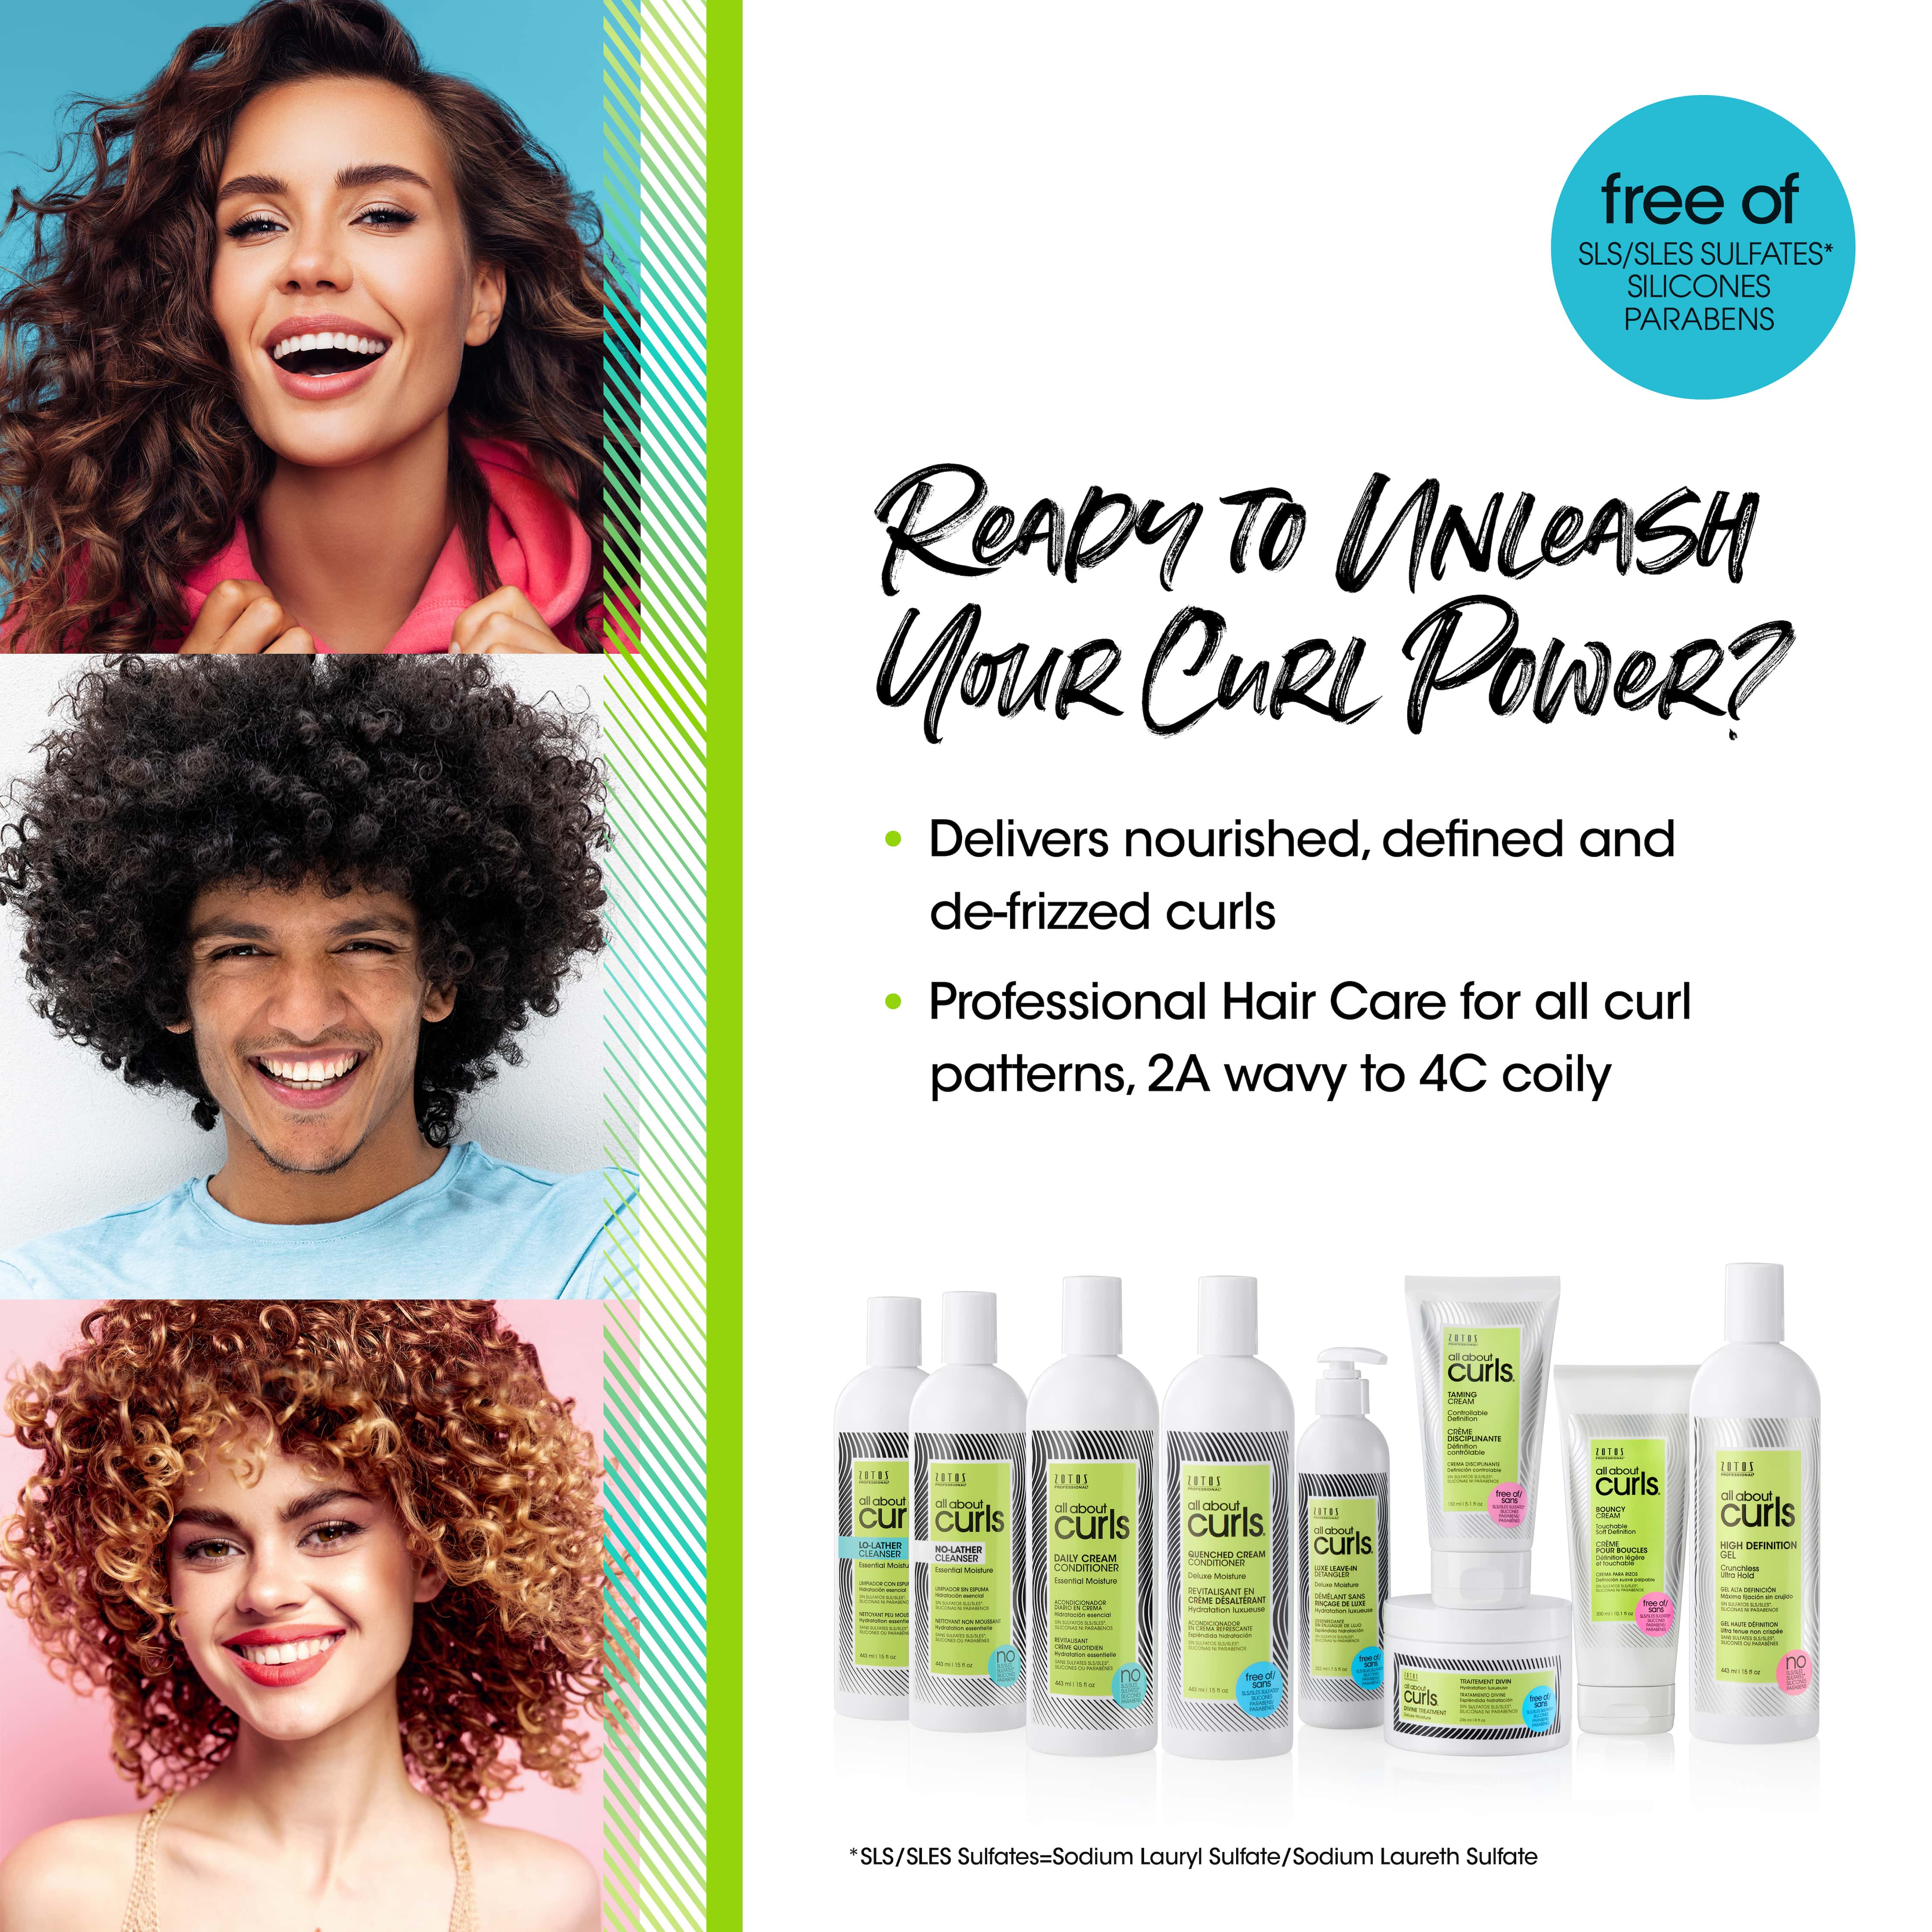 All About Curls® Lo-Lather Cleanser